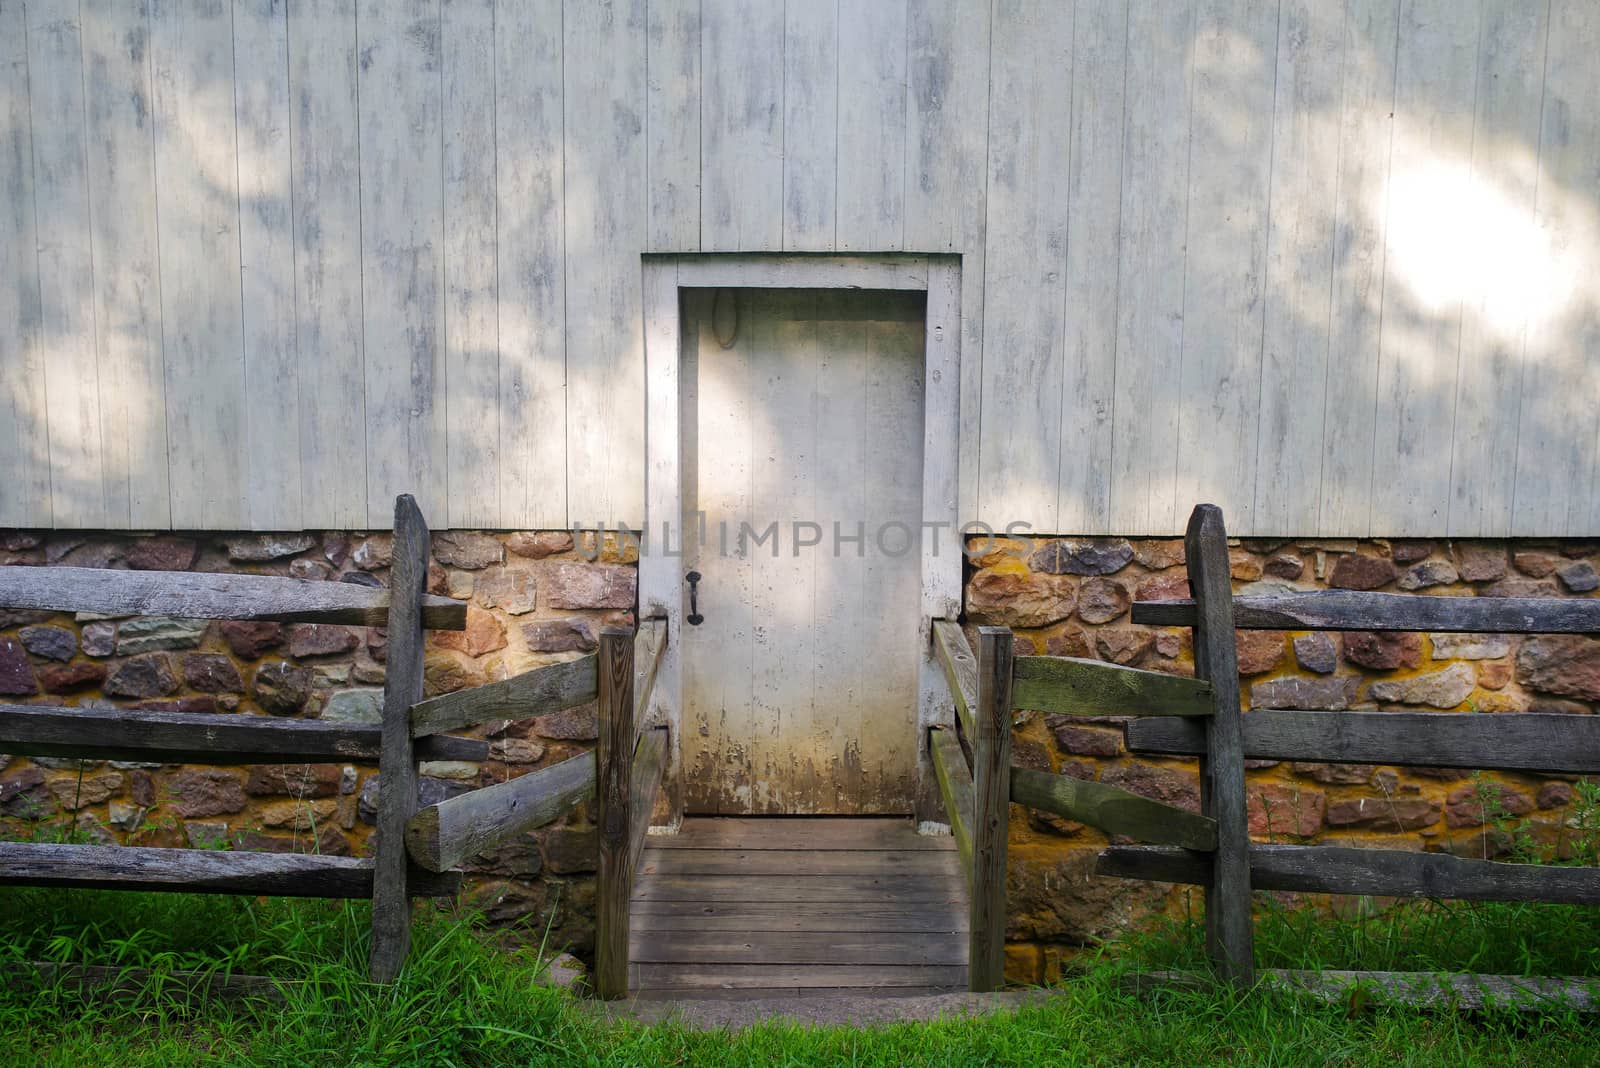 Recessed door sits back  from green grass and wooden fence, centered in dappled golden hour sunlight.